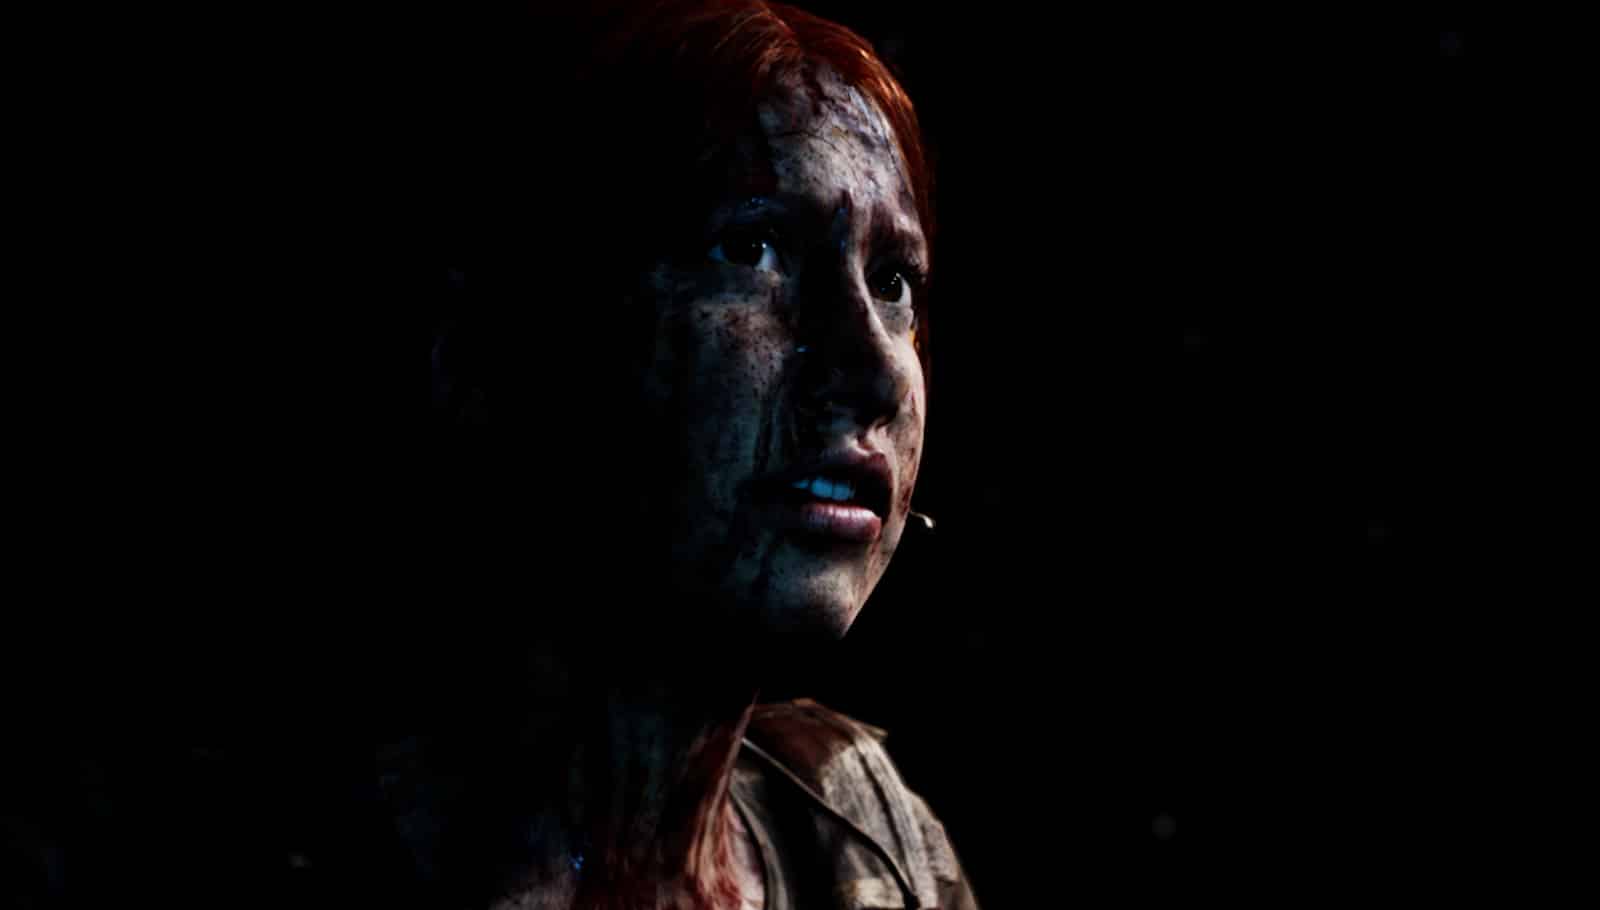 Blood stained woman against a black background